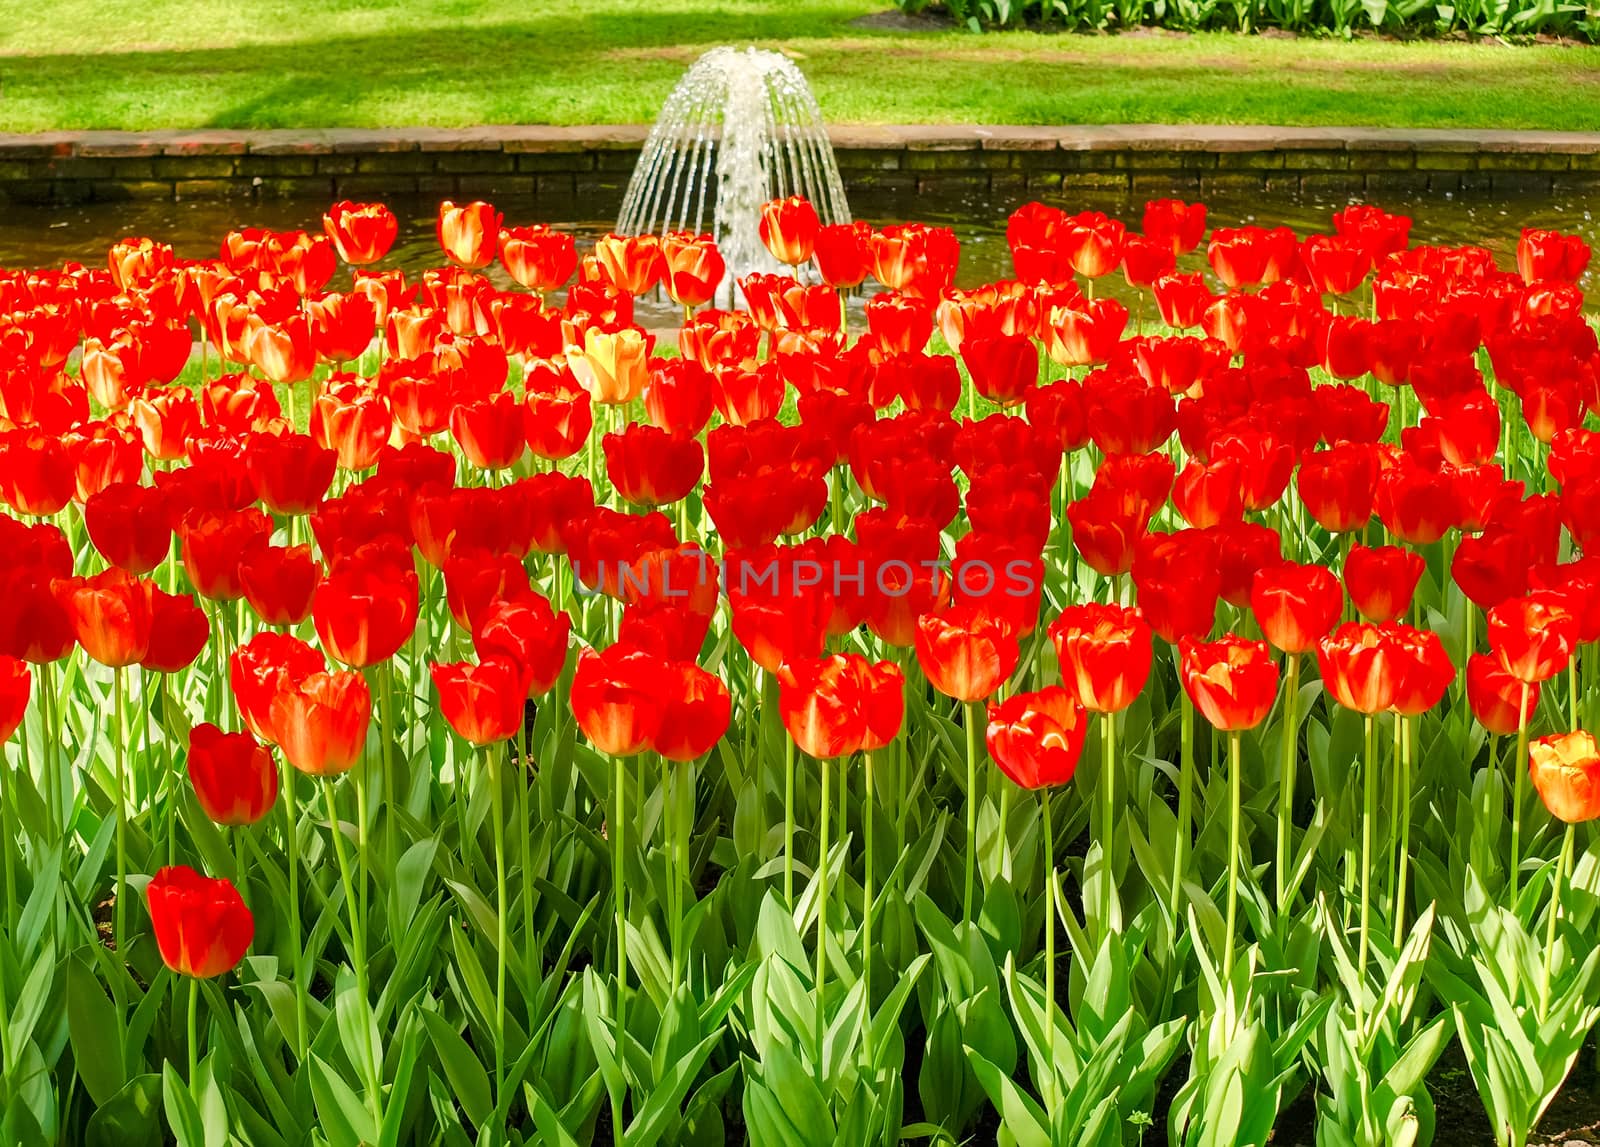 Flower bed of the red tulips on the background of channel with small fountain in Keukenhof Park
